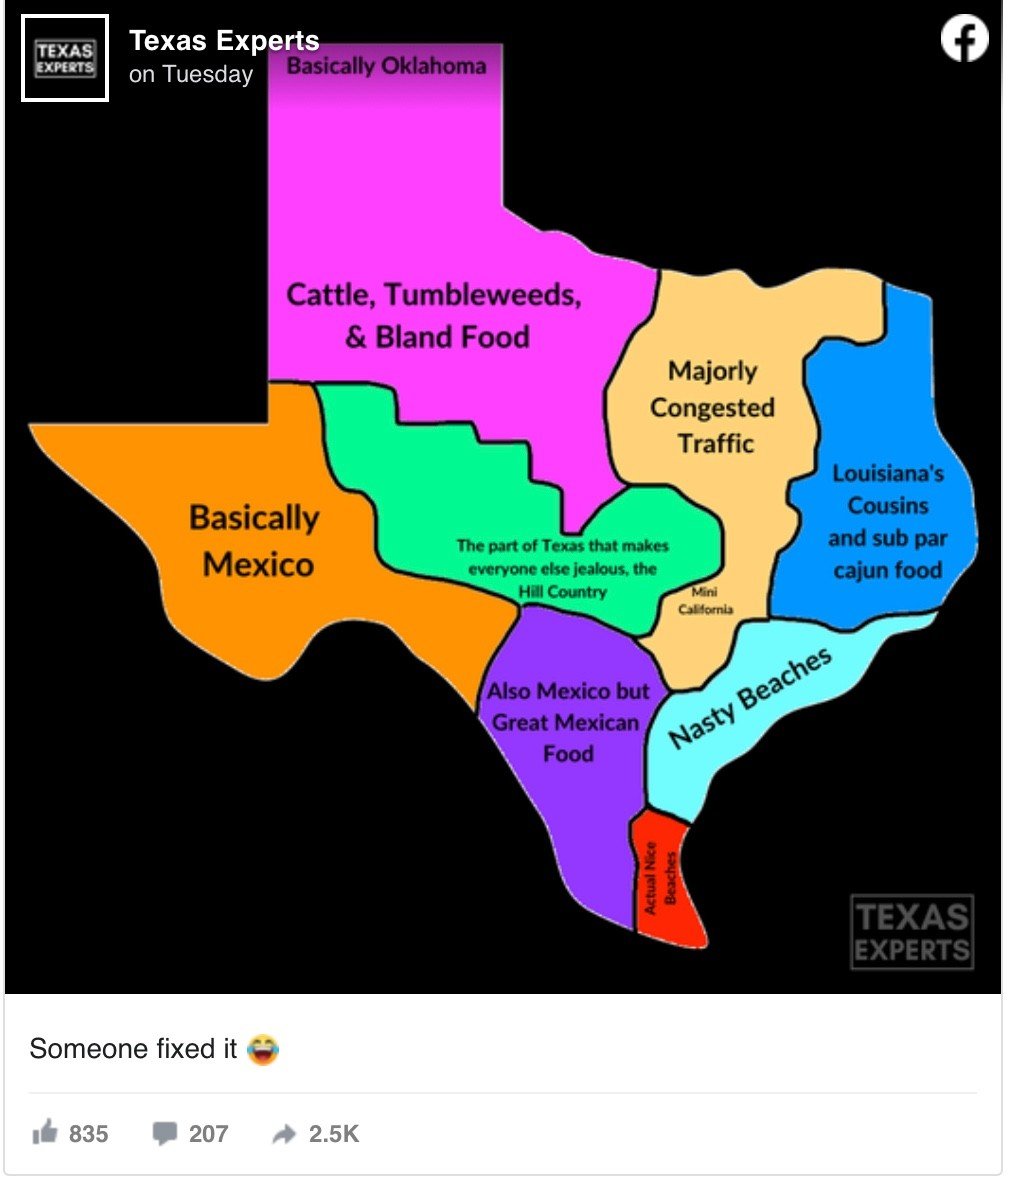 Texans May Agree or Disagree with This Funny Texas Graphic